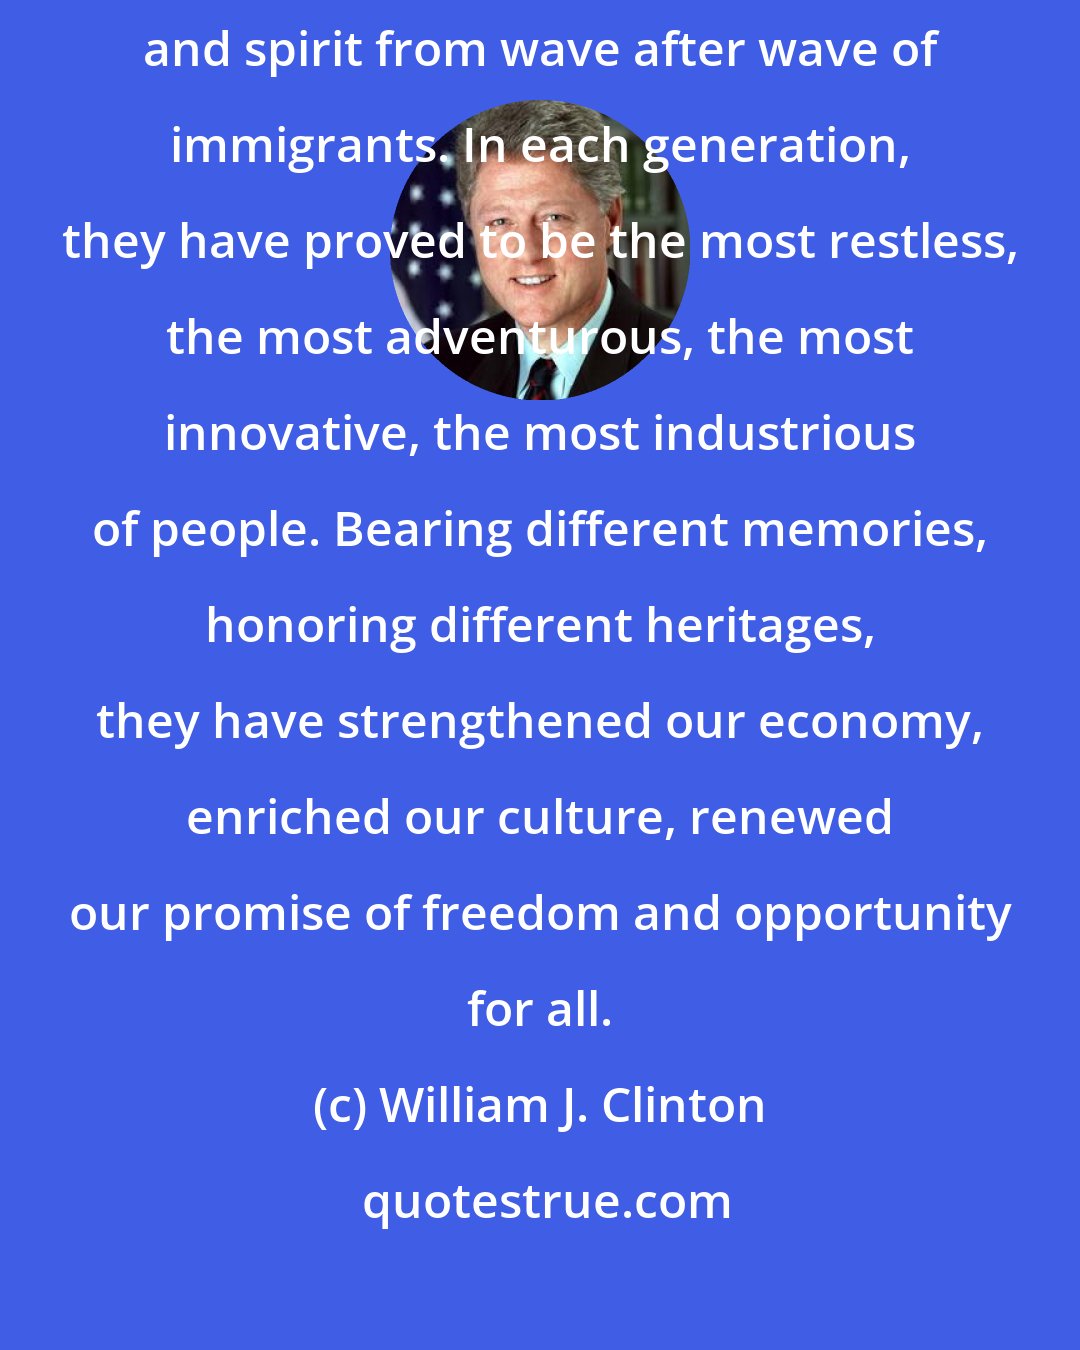 William J. Clinton: More than any other nation on Earth, America has constantly drawn strength and spirit from wave after wave of immigrants. In each generation, they have proved to be the most restless, the most adventurous, the most innovative, the most industrious of people. Bearing different memories, honoring different heritages, they have strengthened our economy, enriched our culture, renewed our promise of freedom and opportunity for all.